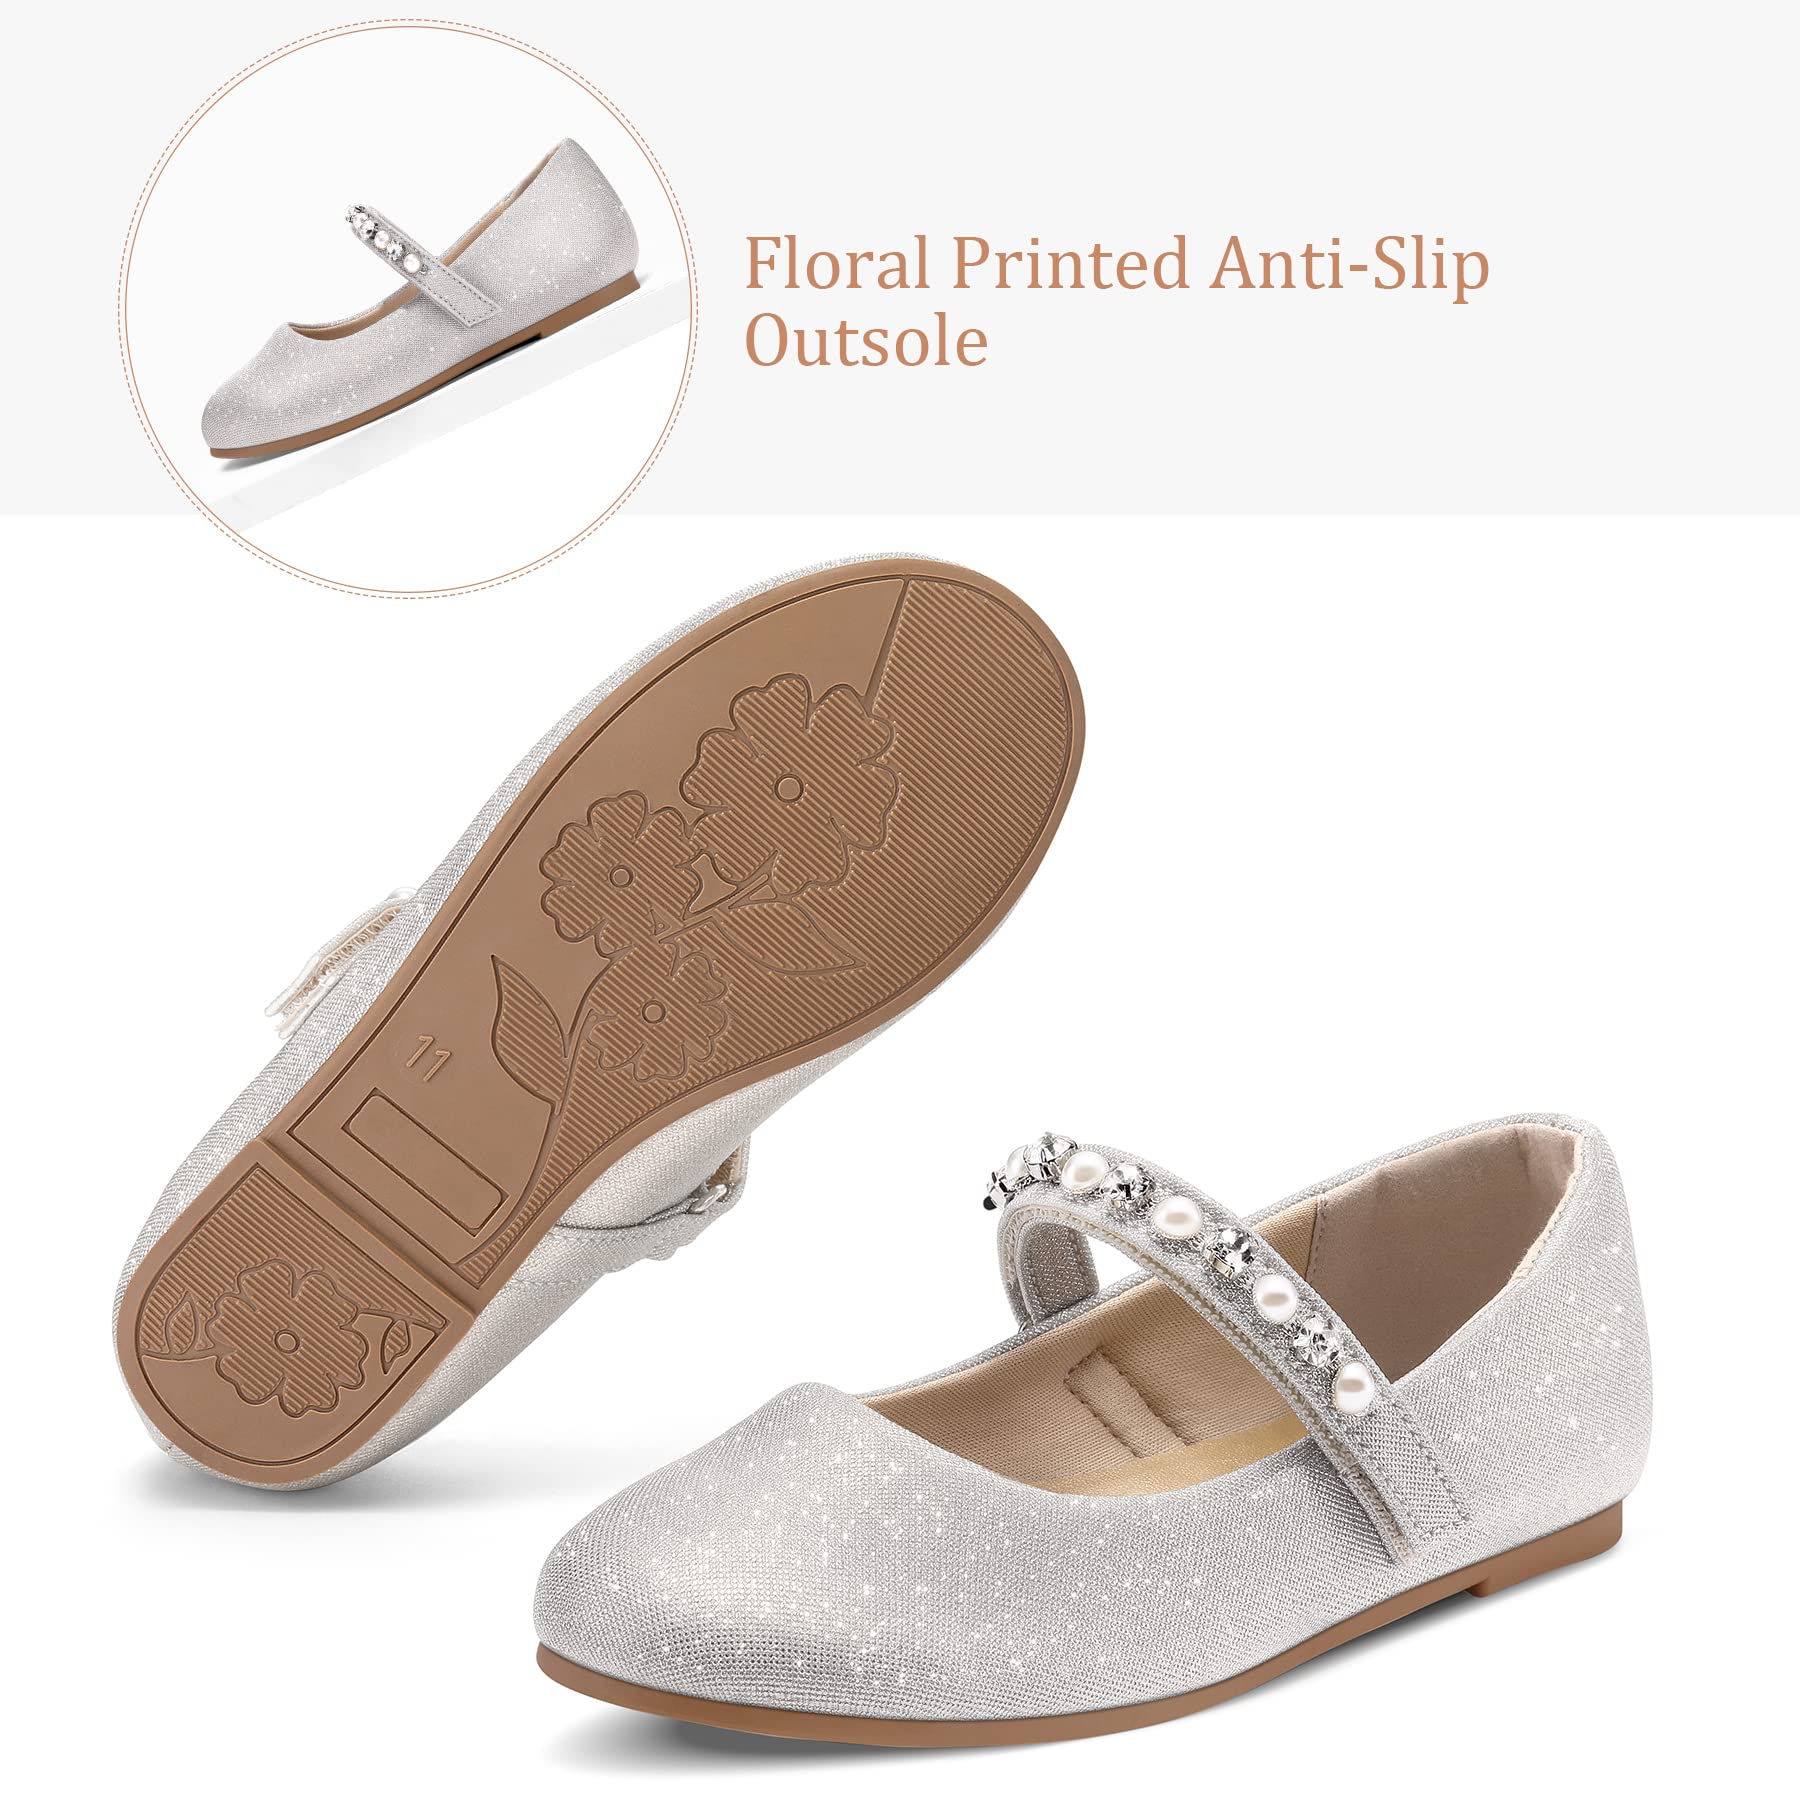 Kids Dress Shoes-Mary Jane Flats with Pearl Rhinestone Strap